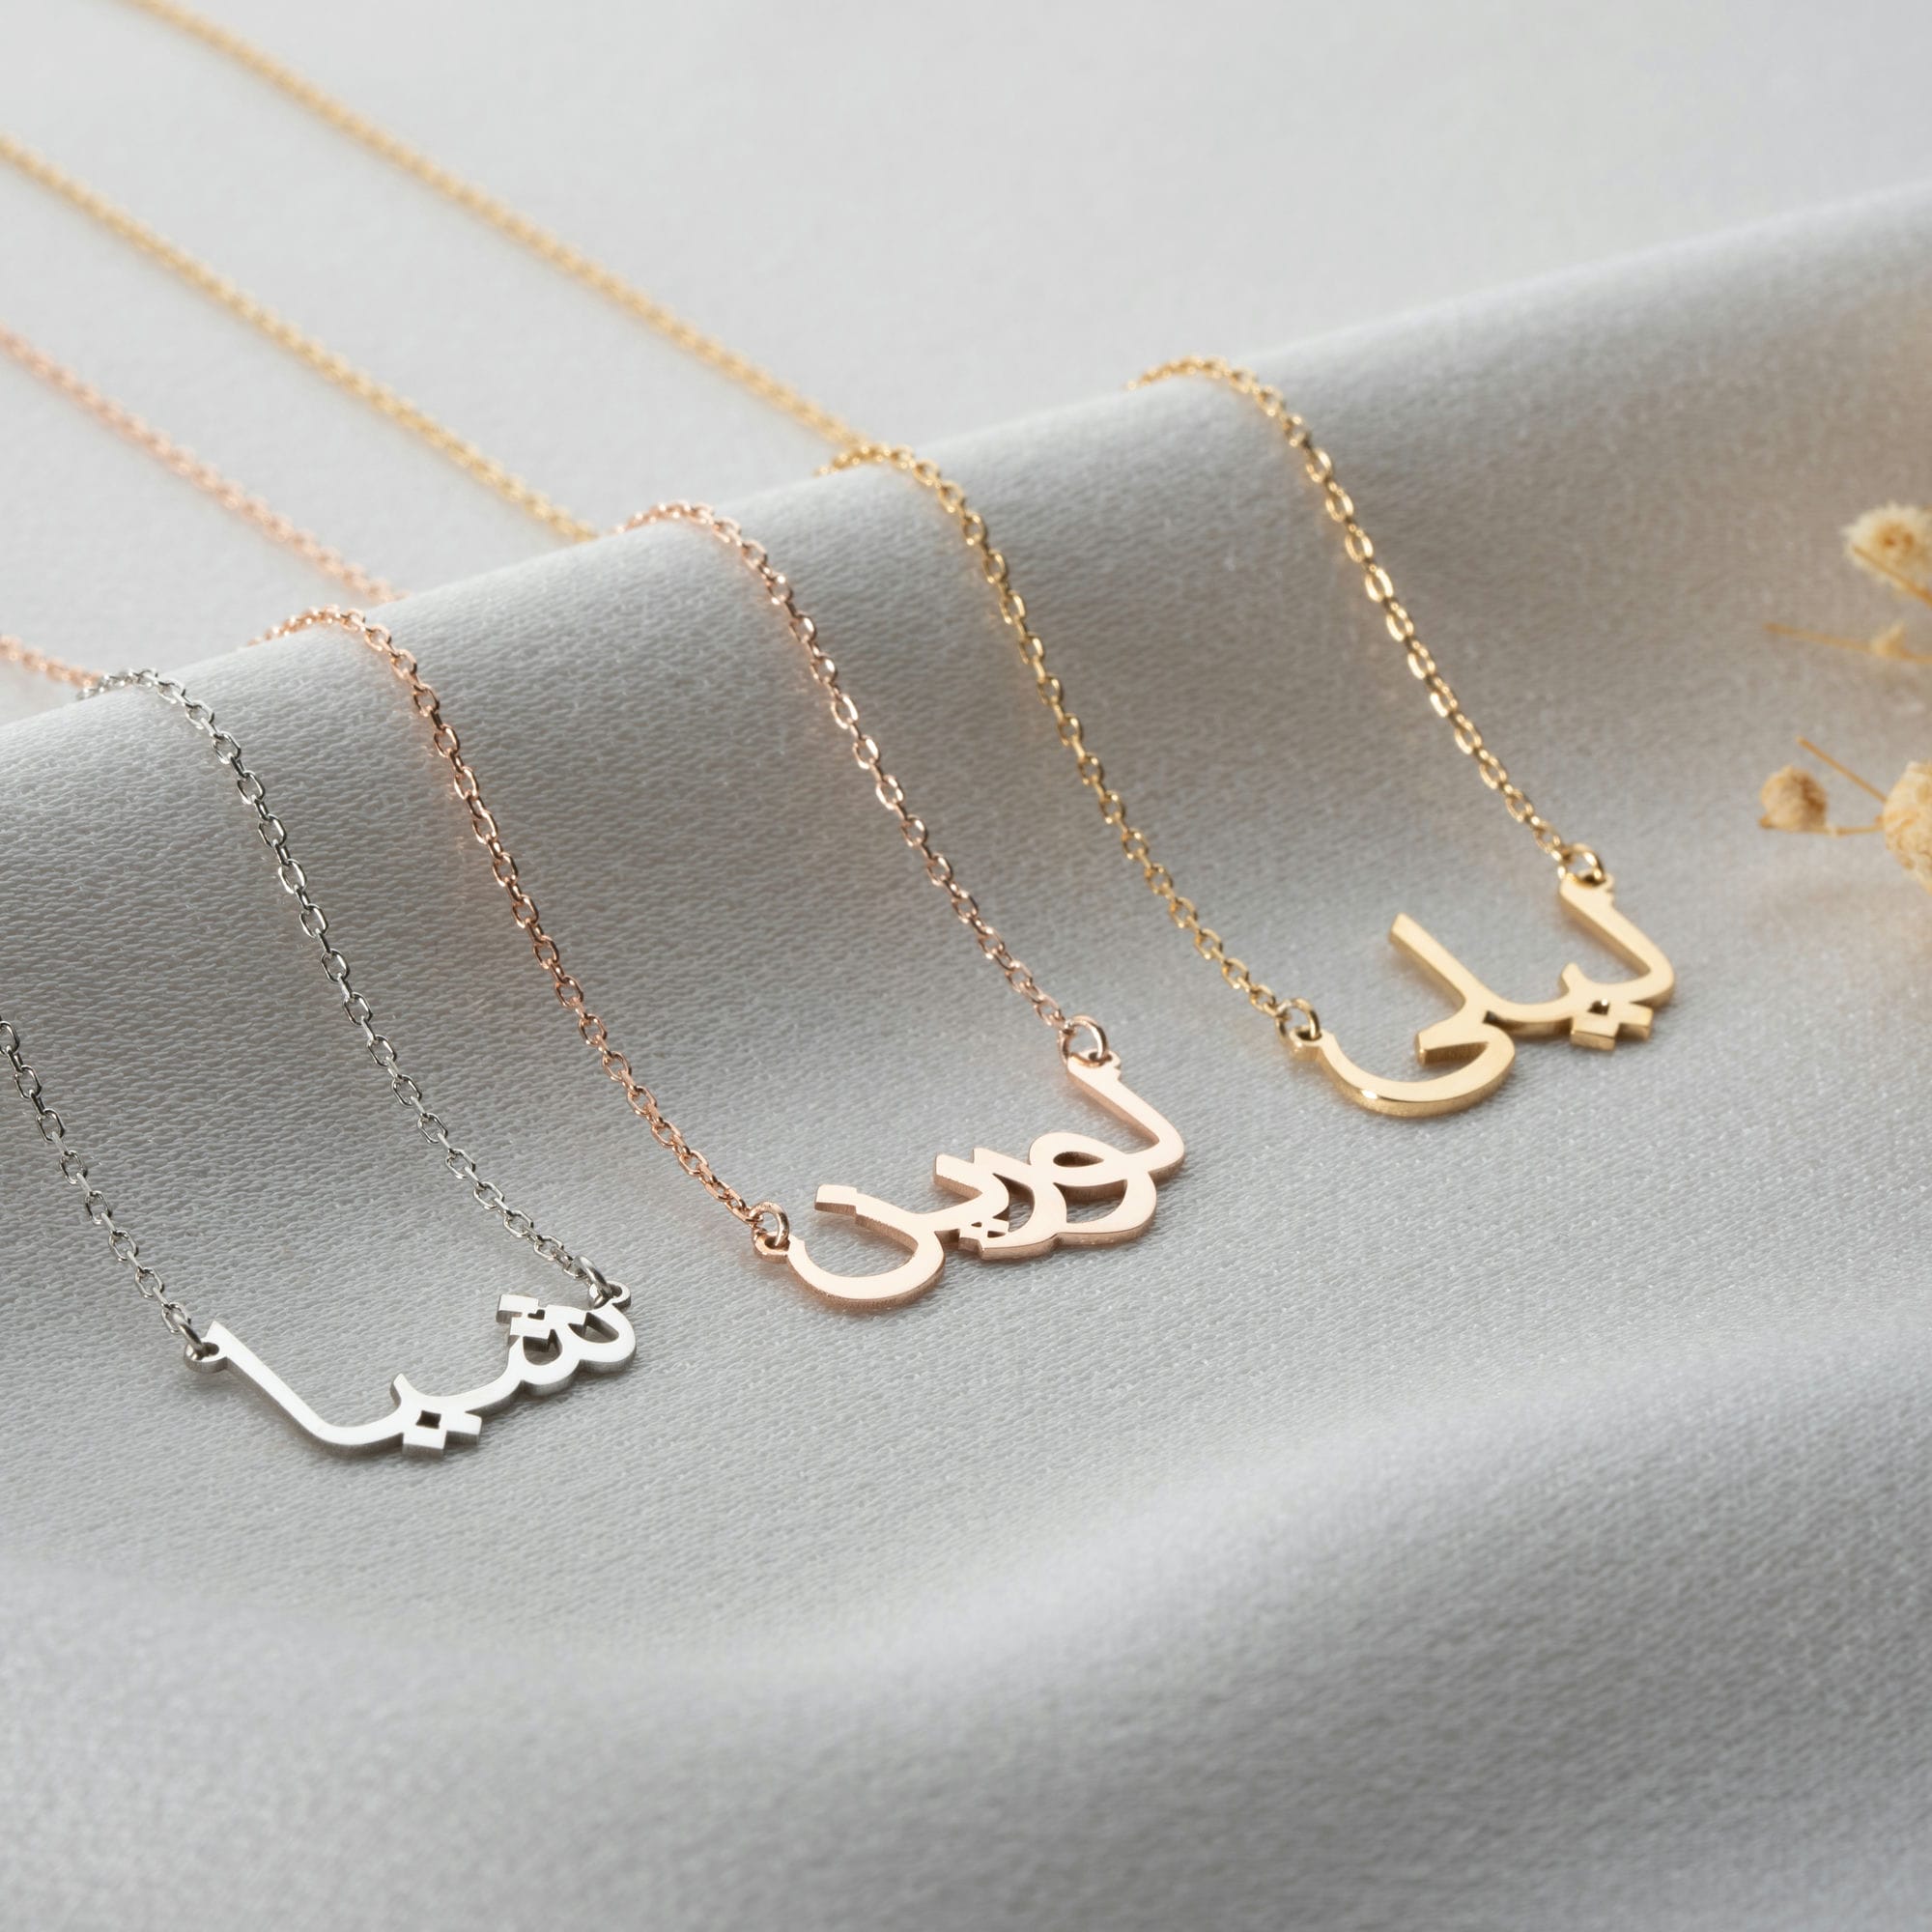 Personalized Arabic Name Necklace, Arabic Calligraphy Name Necklace – Nior